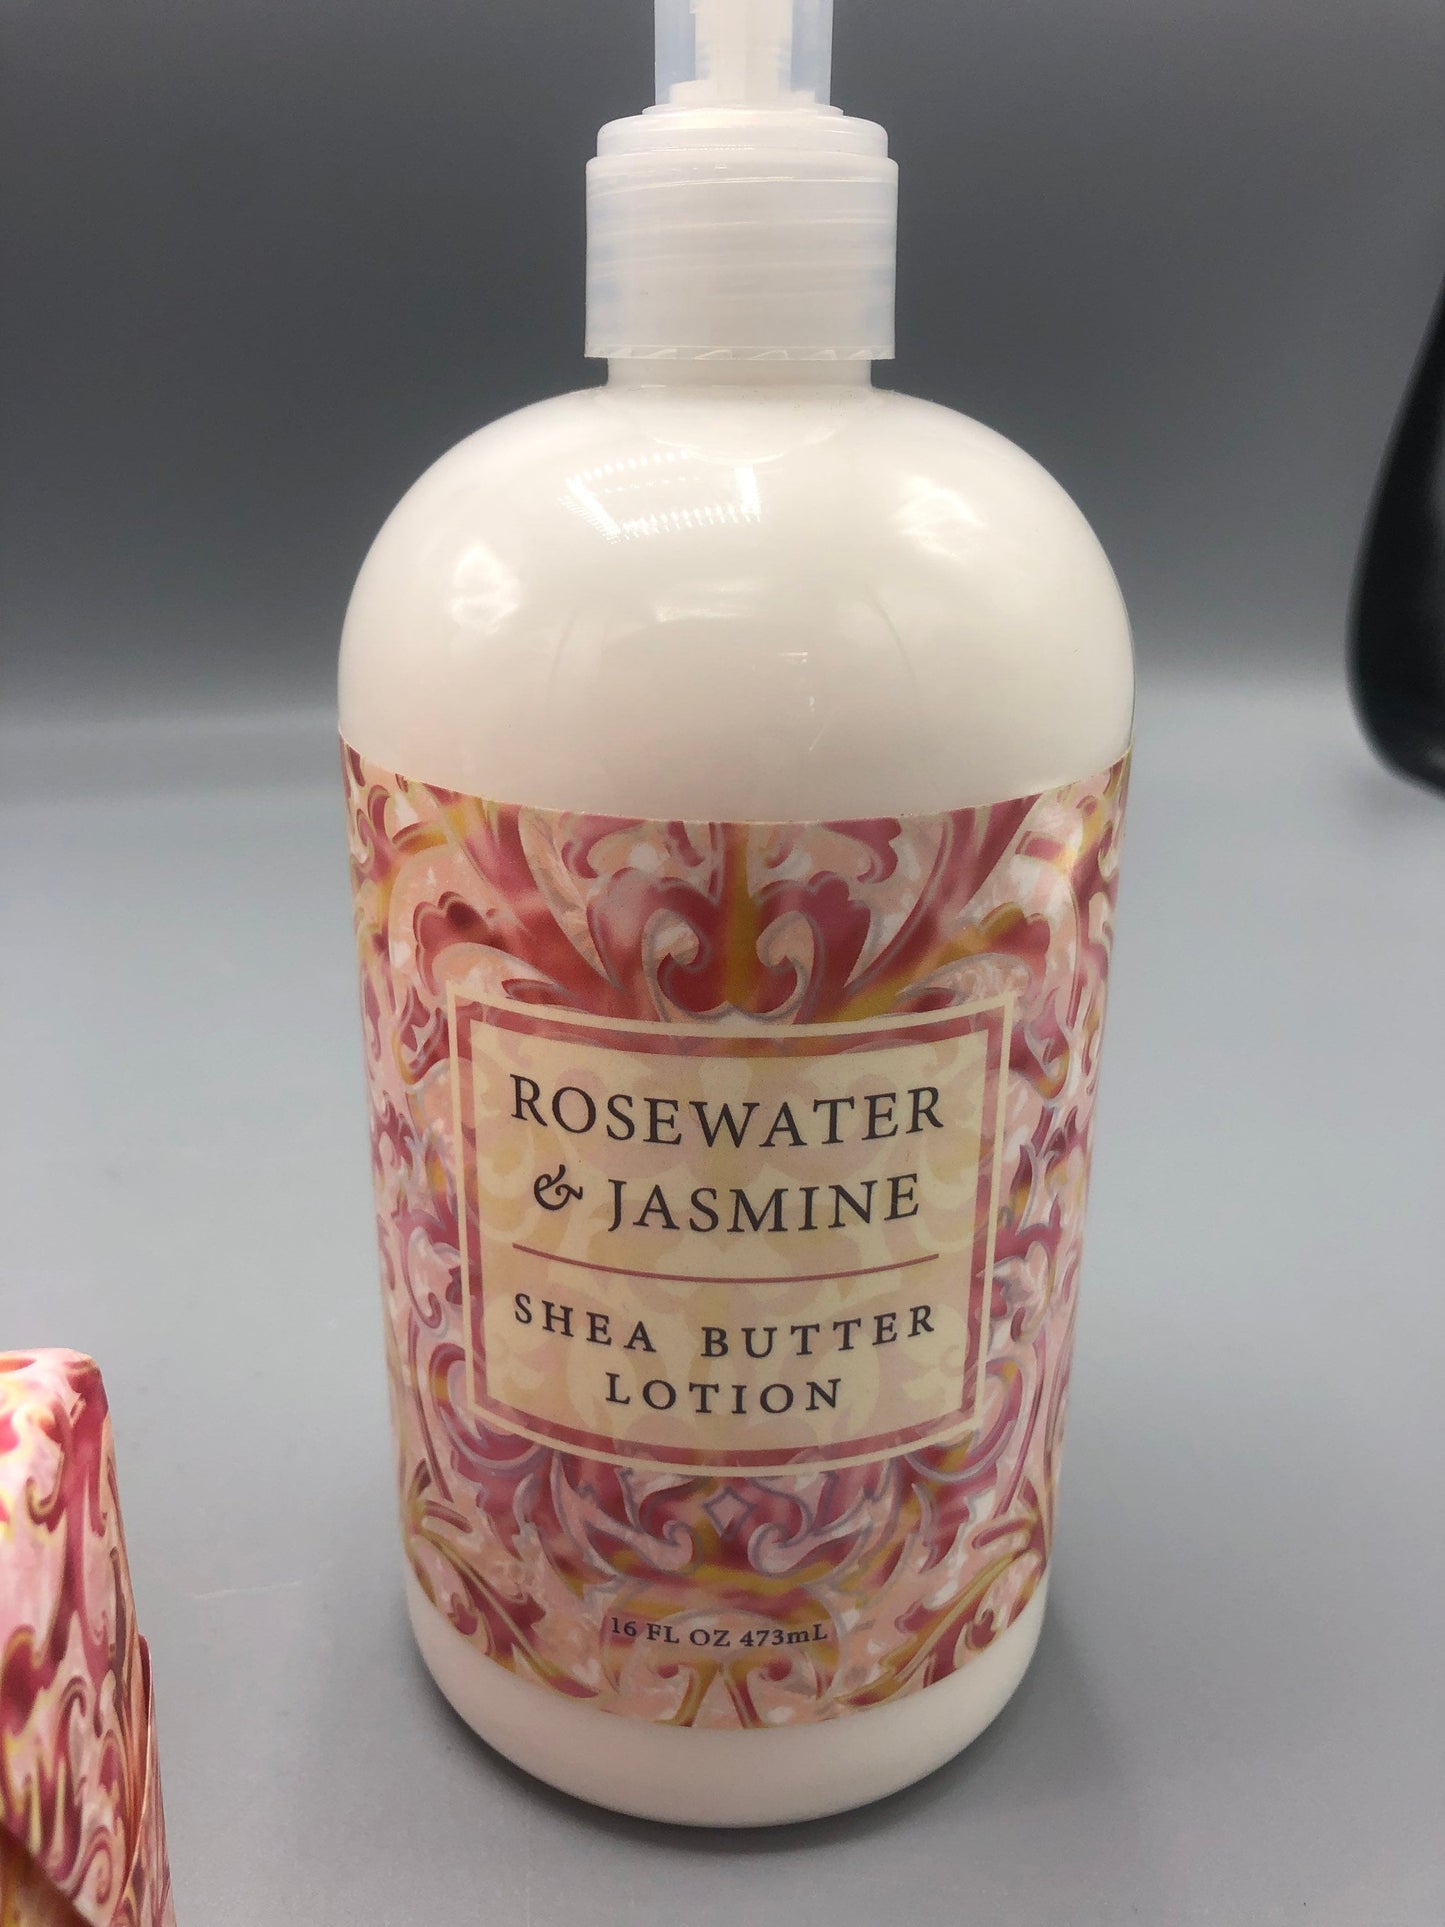 Rosewater and Jasmine she butter lotion & hand soap 16oz